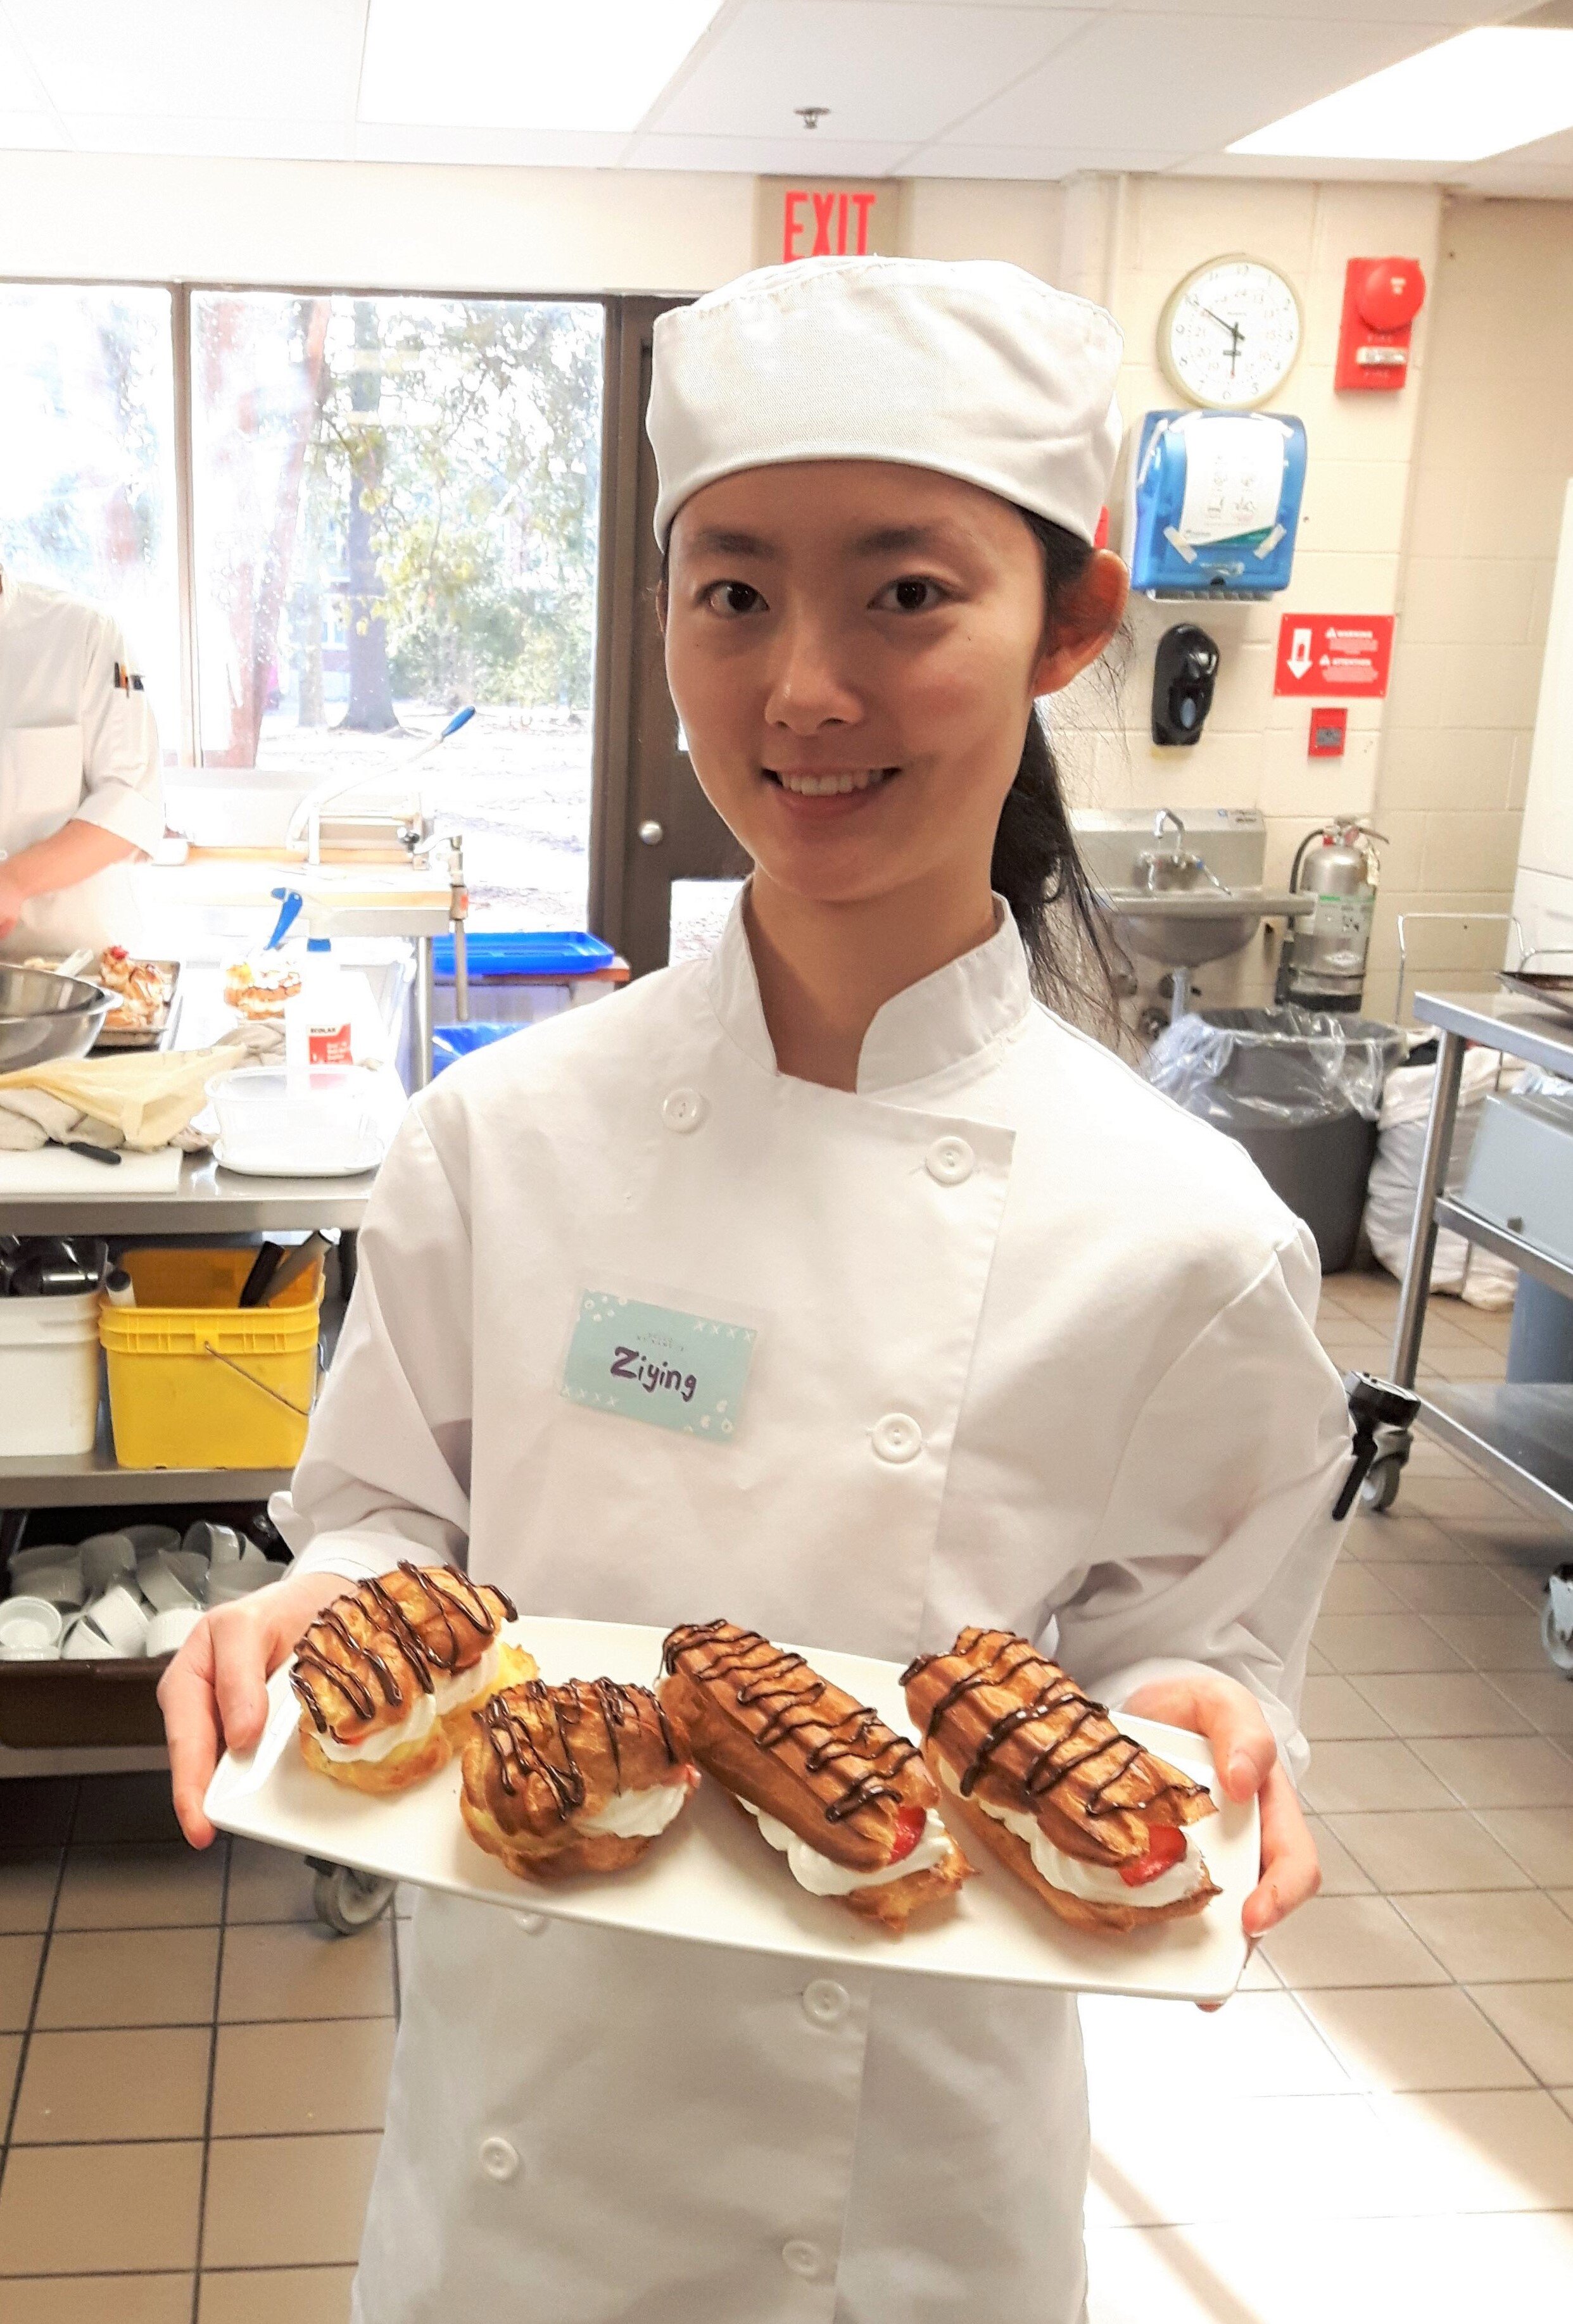 Made some eclairs with my classmates when taking the restaurant management course at the University of Guelph